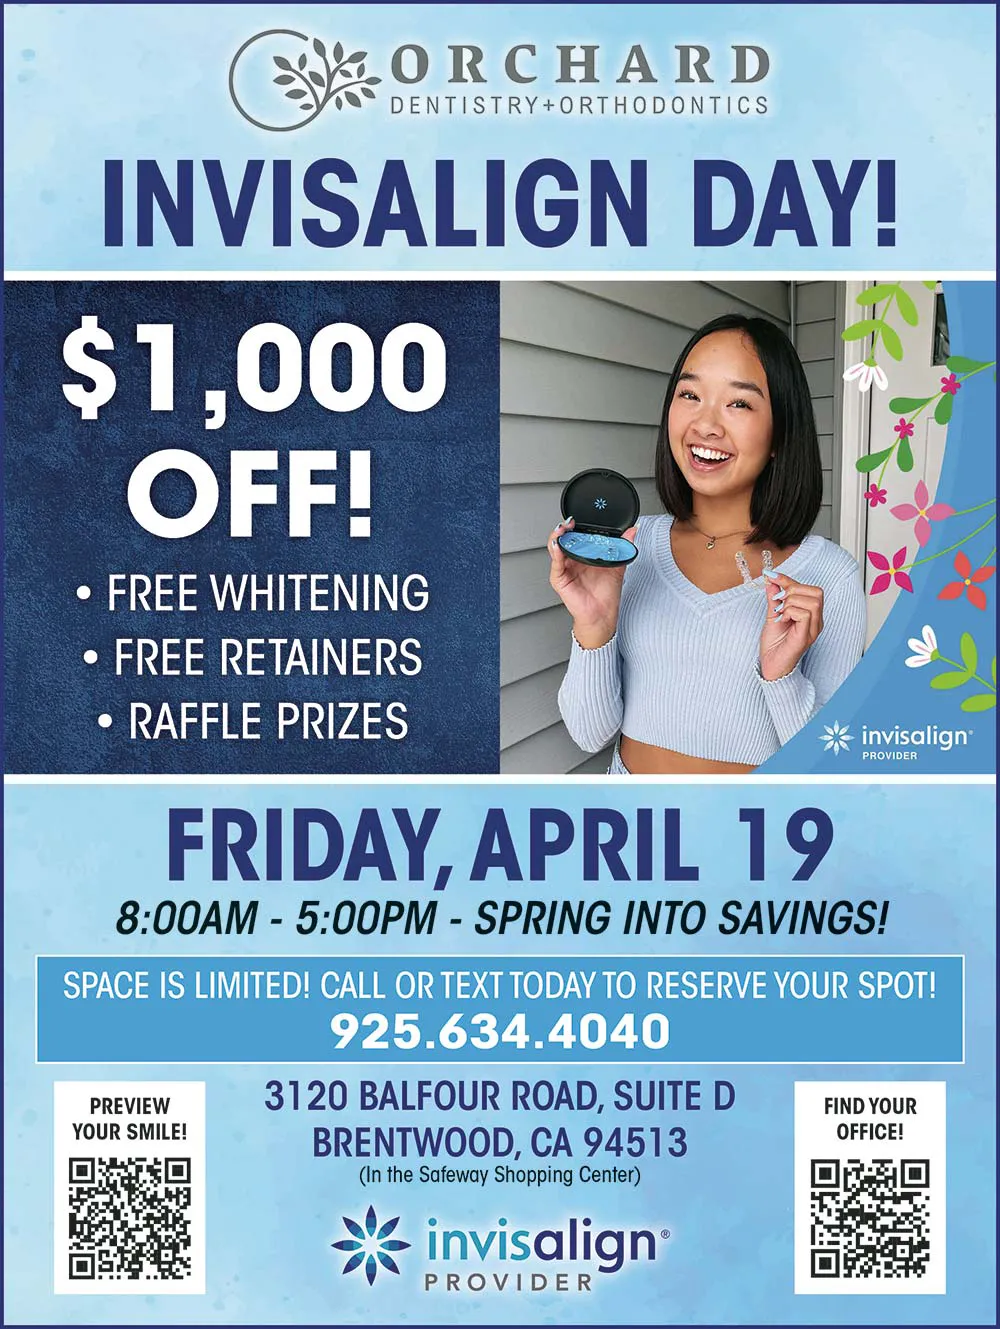 Invisalign Day - Having trouble seeing this? Please contact our office for details